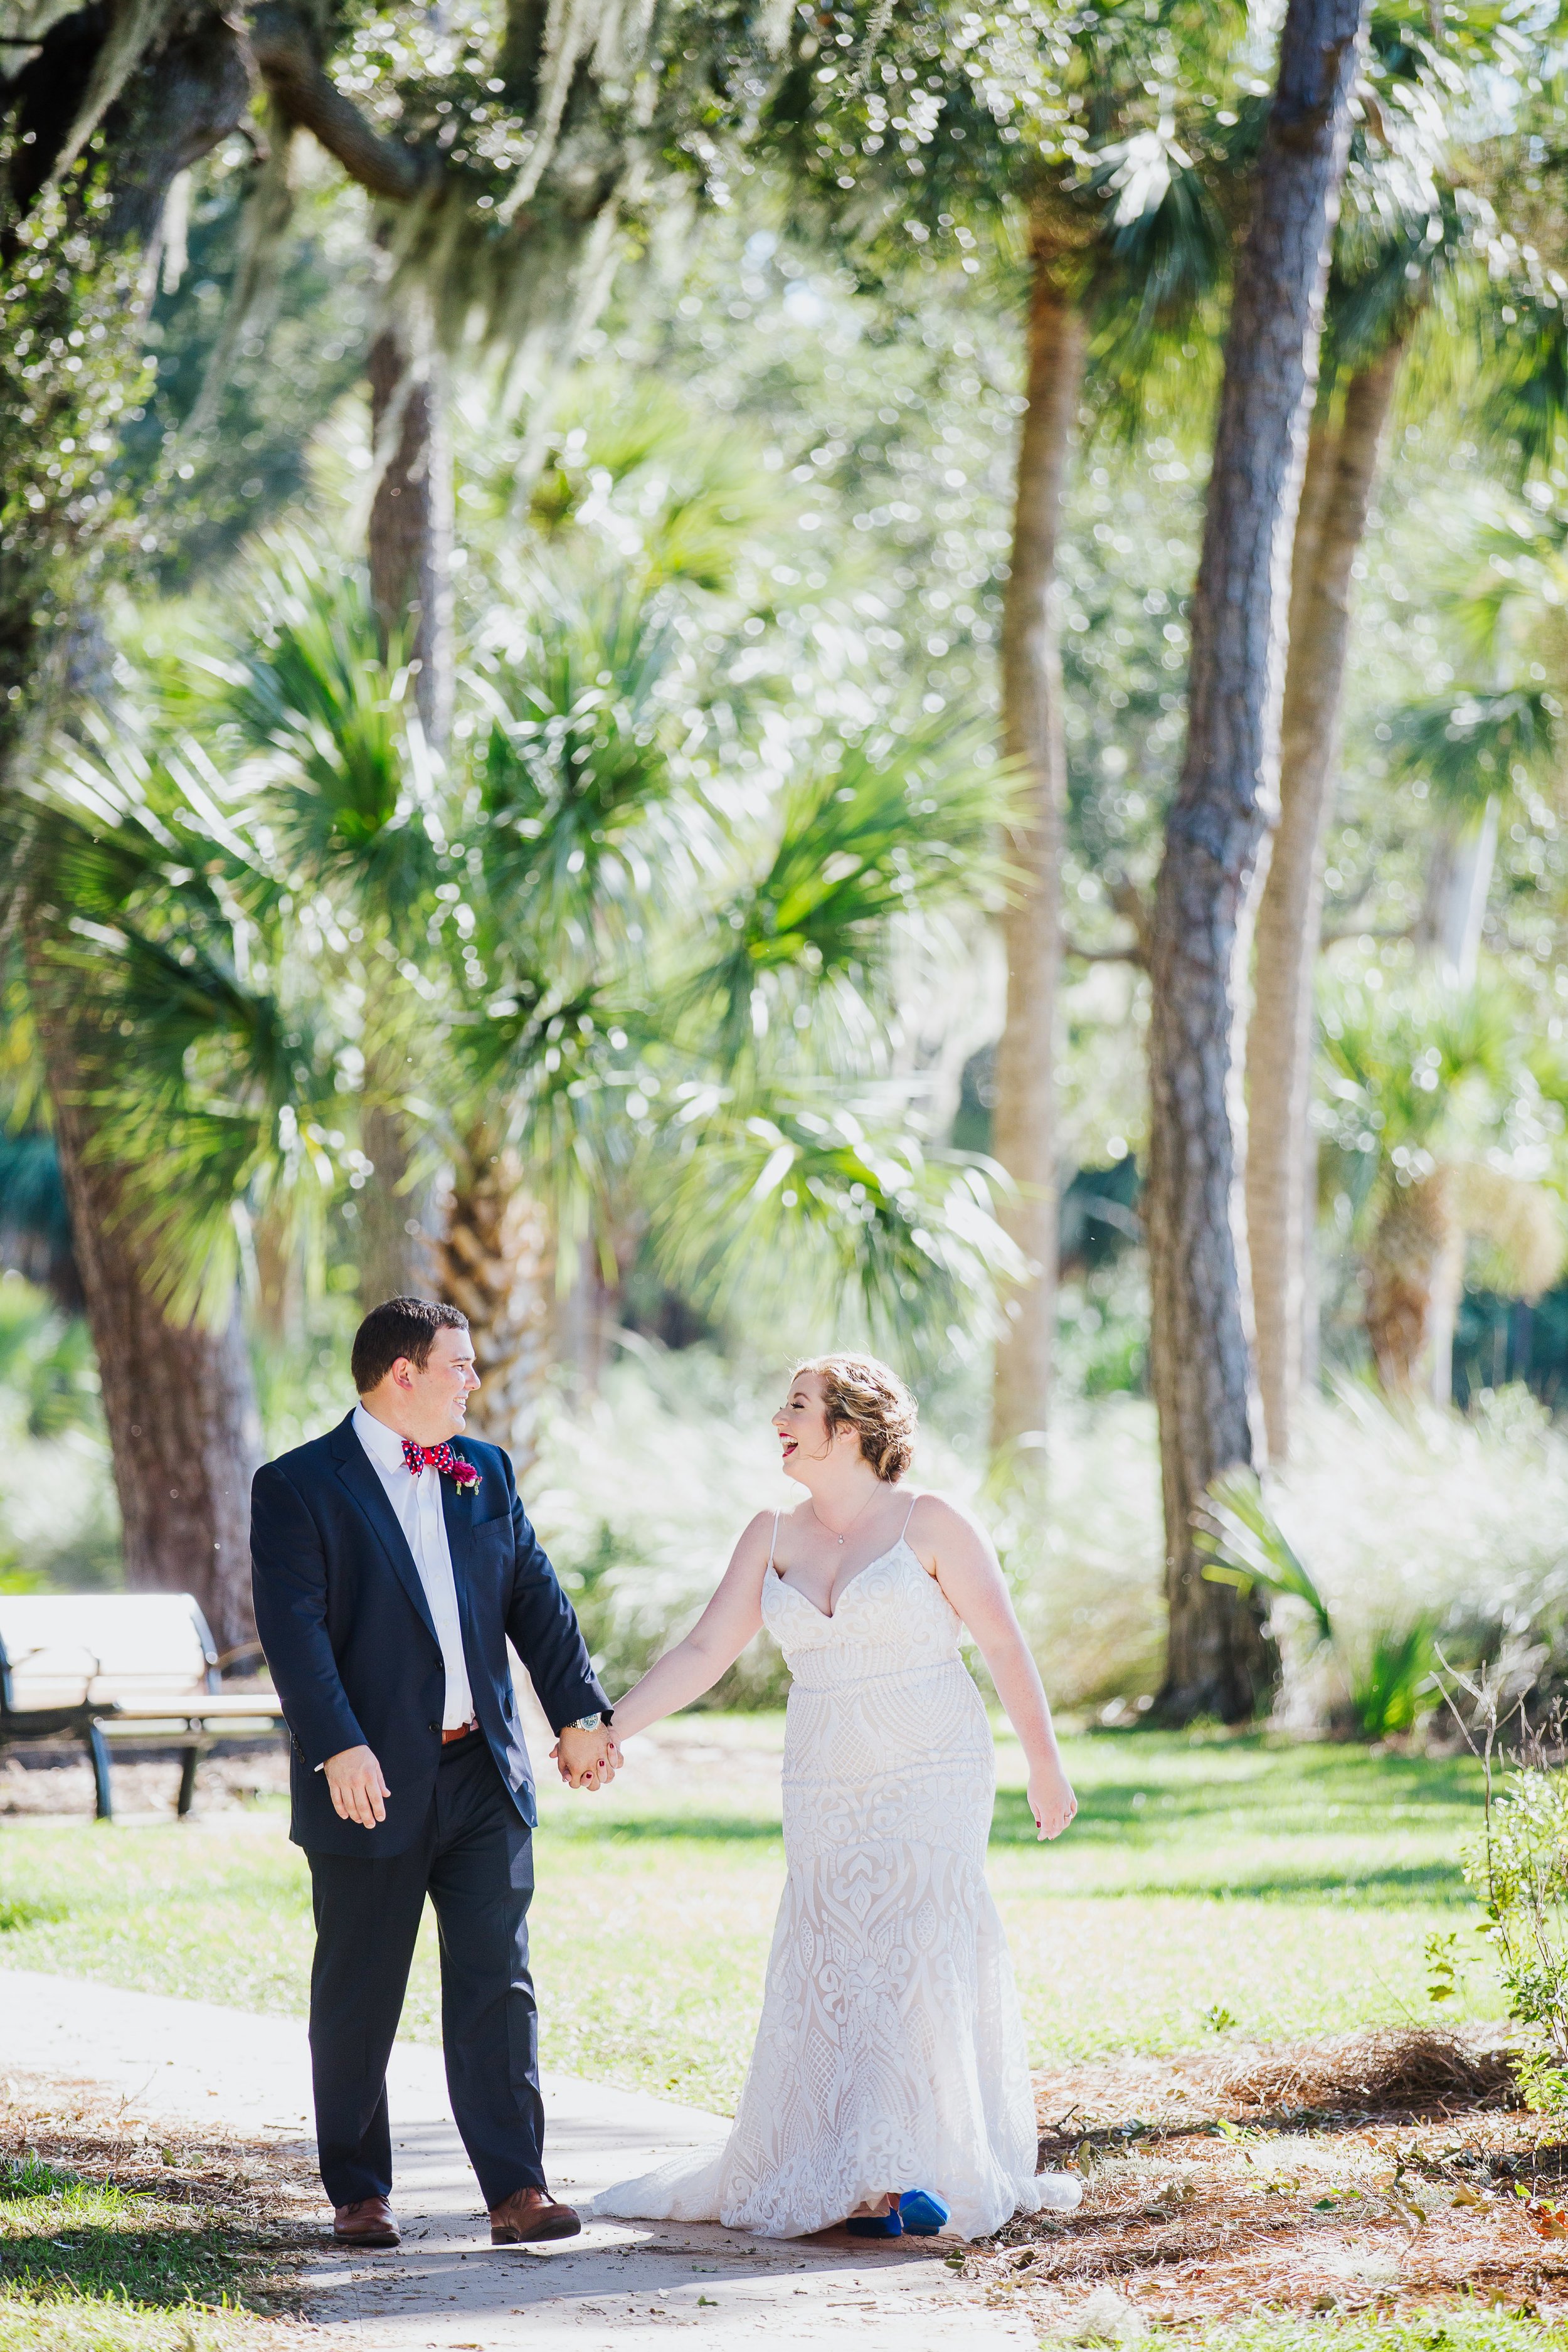 ivory_and_beau_savannah_bridal_shop_ivory_and_beau_bride_mary_kate_west_by_blush_by_hayley_paige_izzy_hudgins_photography_Savannah_wedding_dress_16.jpg